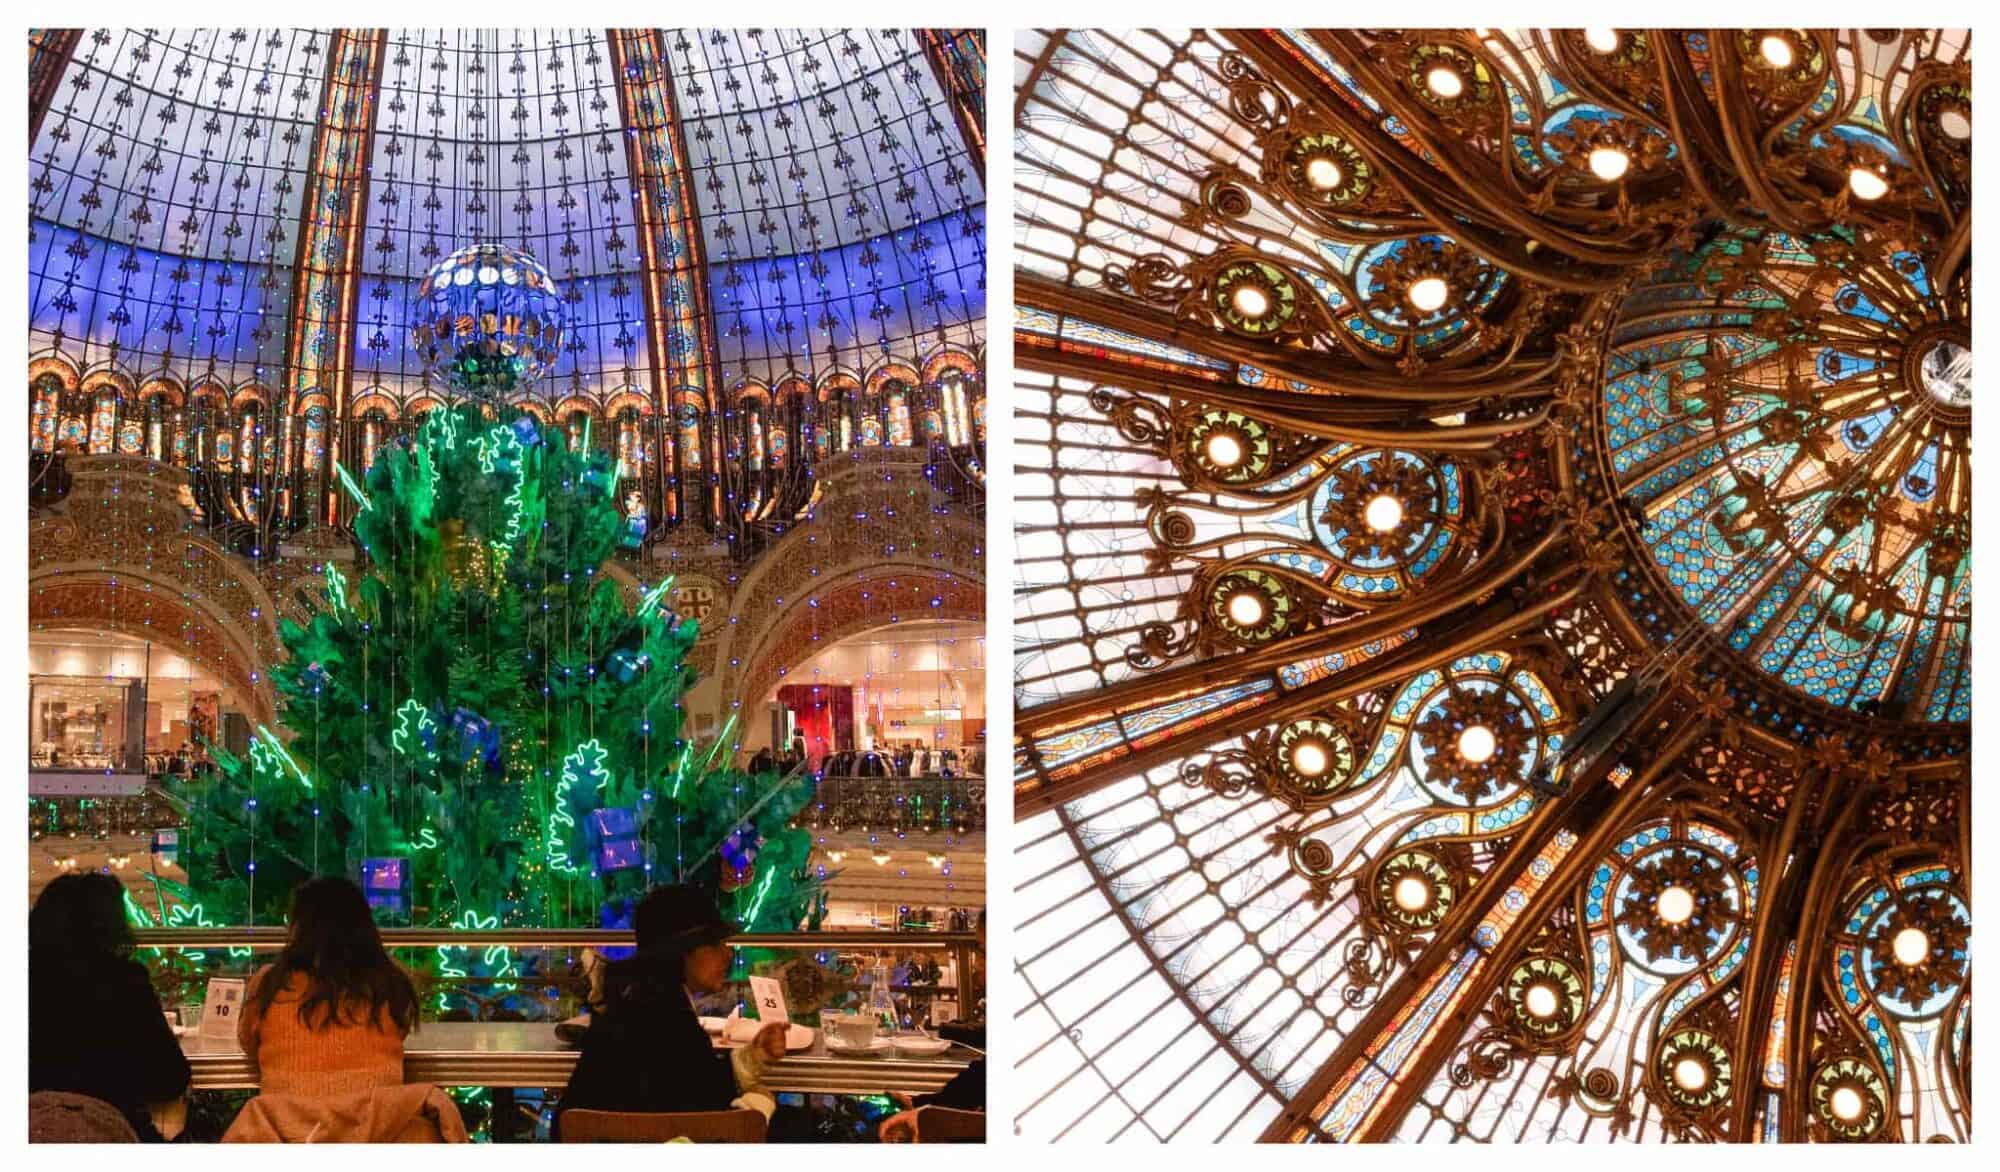 Left: The christmas tree displayed at Galeries Lafayette, Right: the roof of Galeries Lafayette